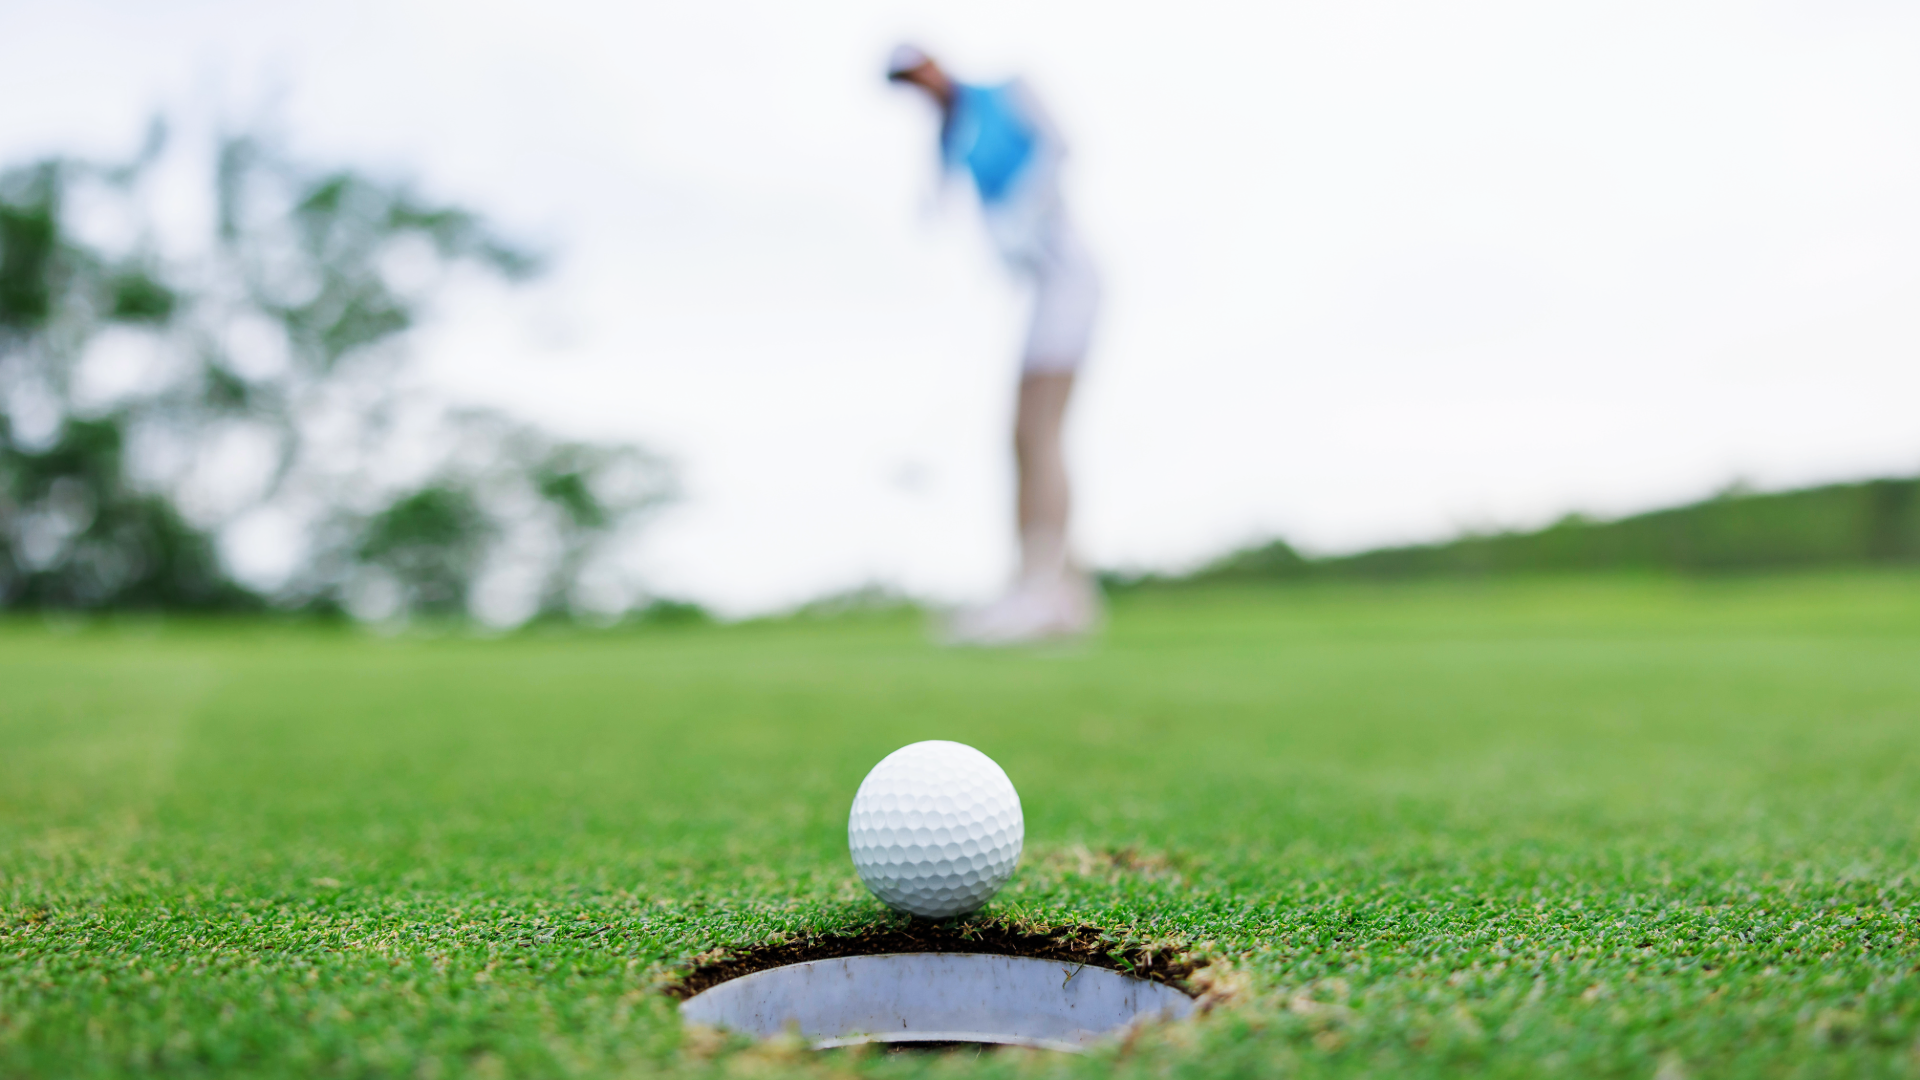 Golf ball at the edge of the hole on the greens with a blurred background of golfer in the back